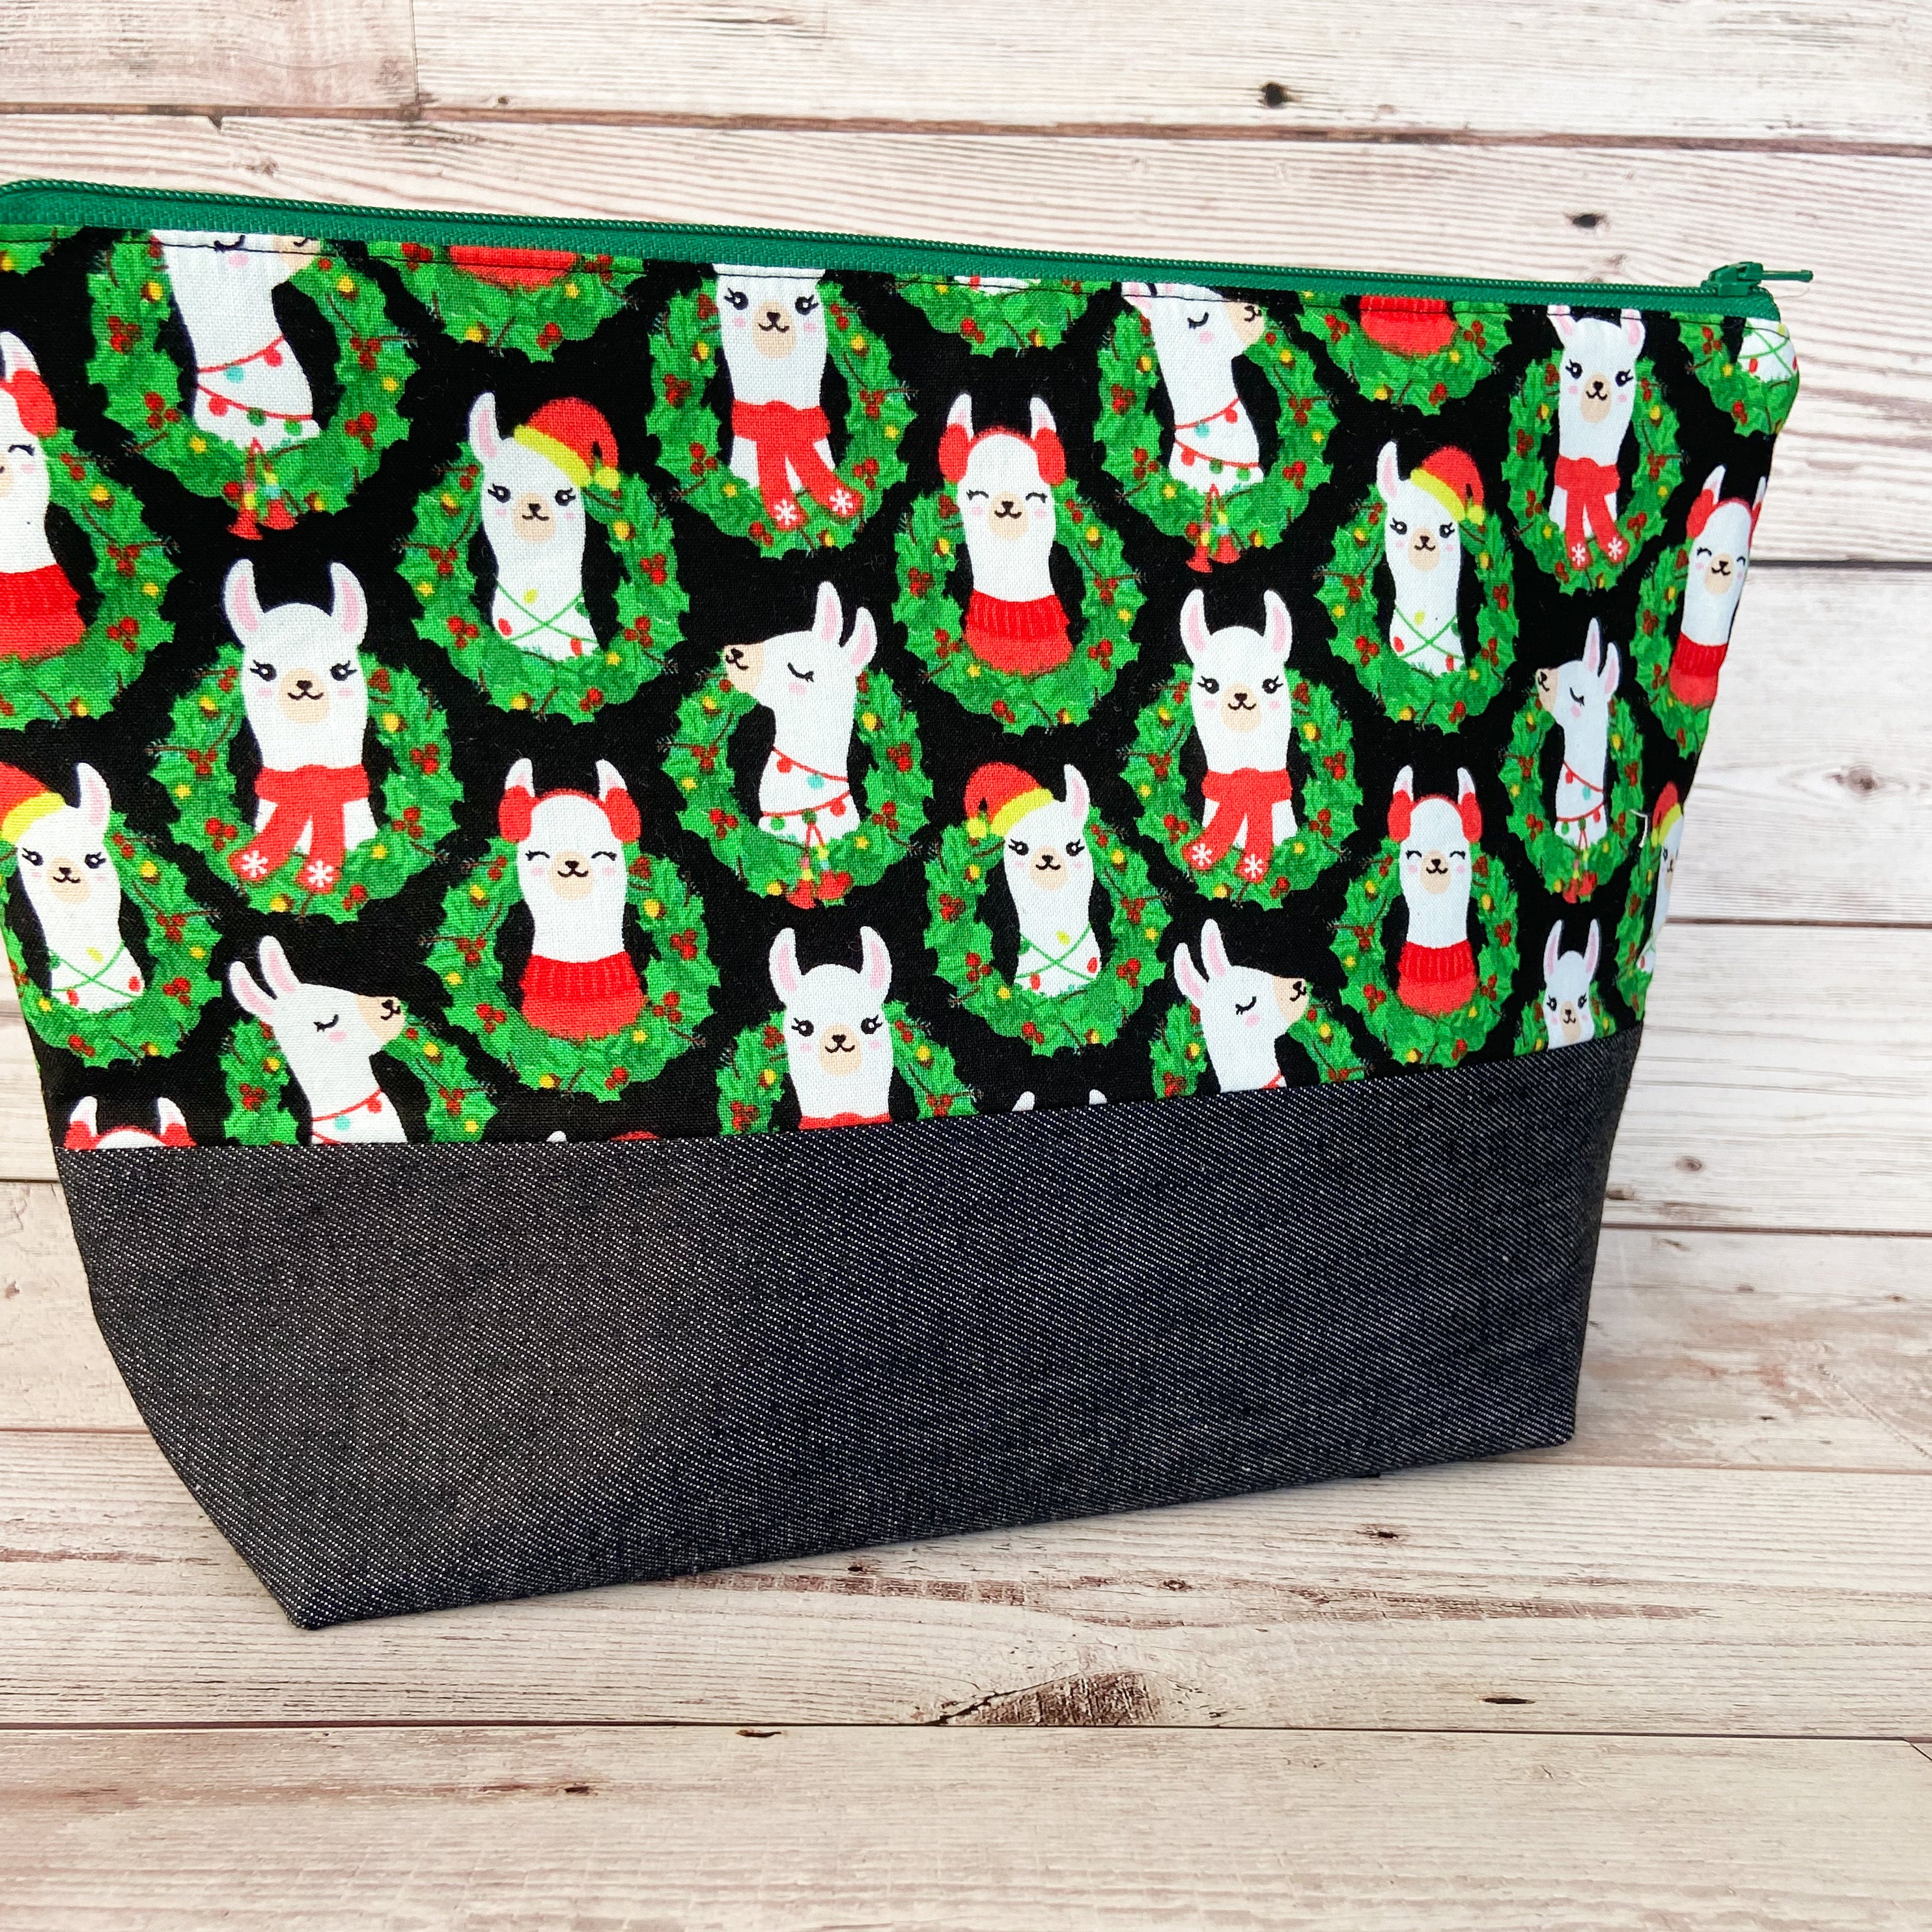 Denim - Small Zippered Project Bag - Llamas with Wreaths